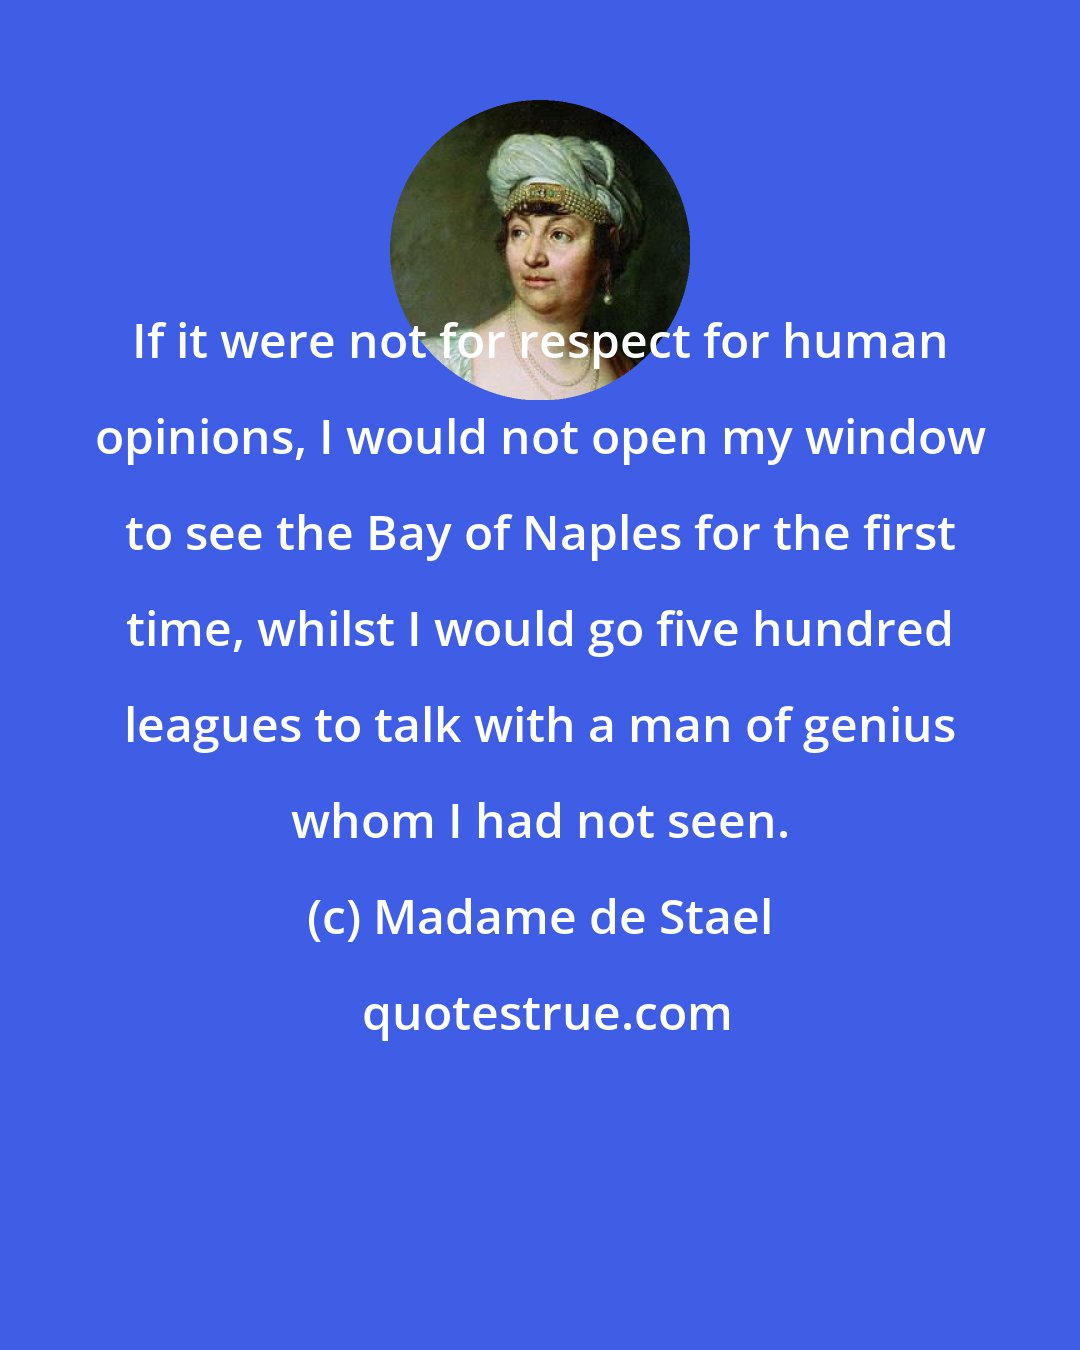 Madame de Stael: If it were not for respect for human opinions, I would not open my window to see the Bay of Naples for the first time, whilst I would go five hundred leagues to talk with a man of genius whom I had not seen.